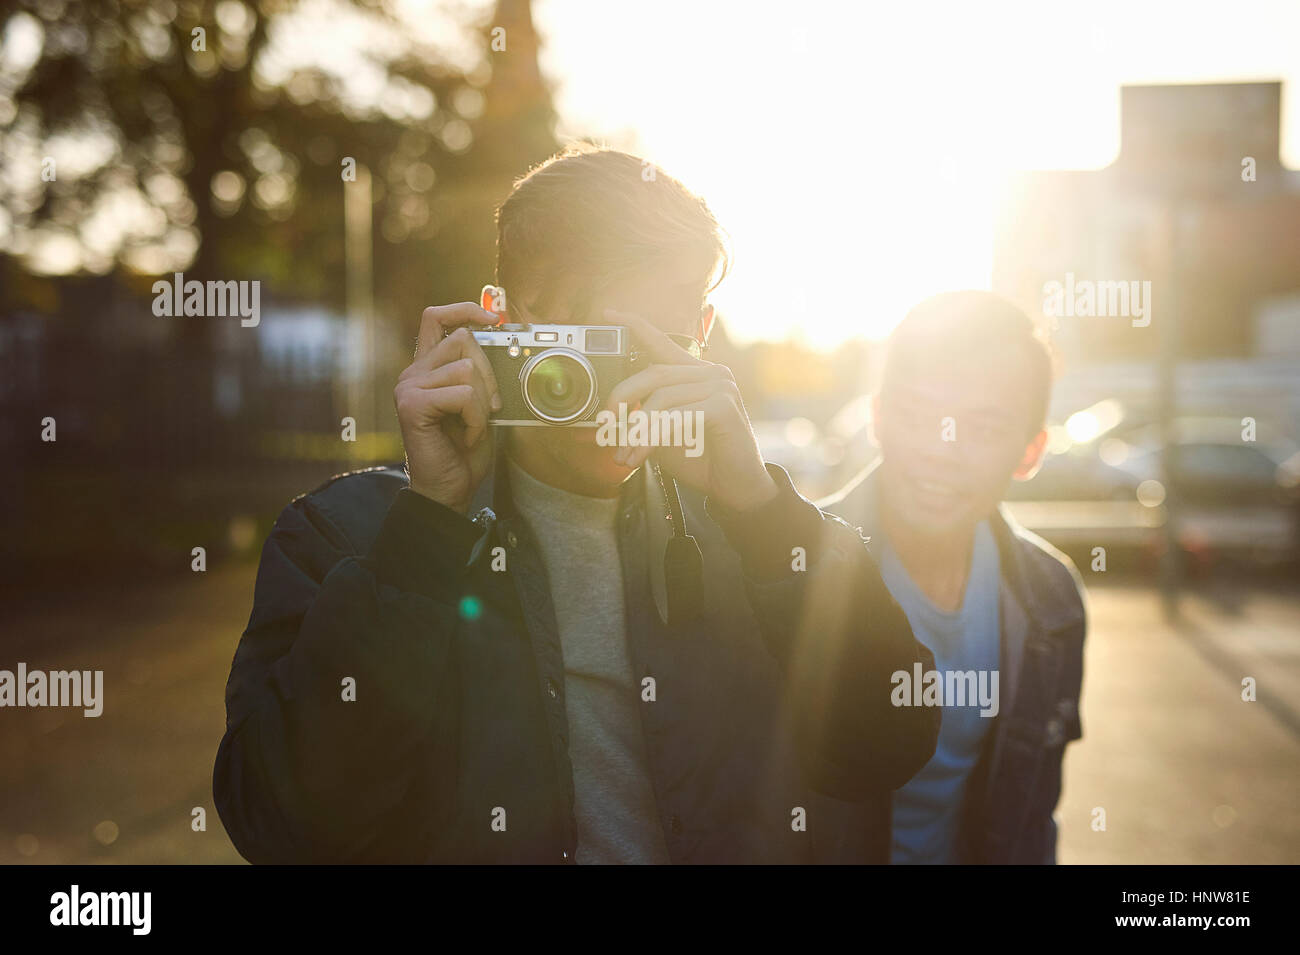 Young man taking camera photographs on sunlit street Stock Photo